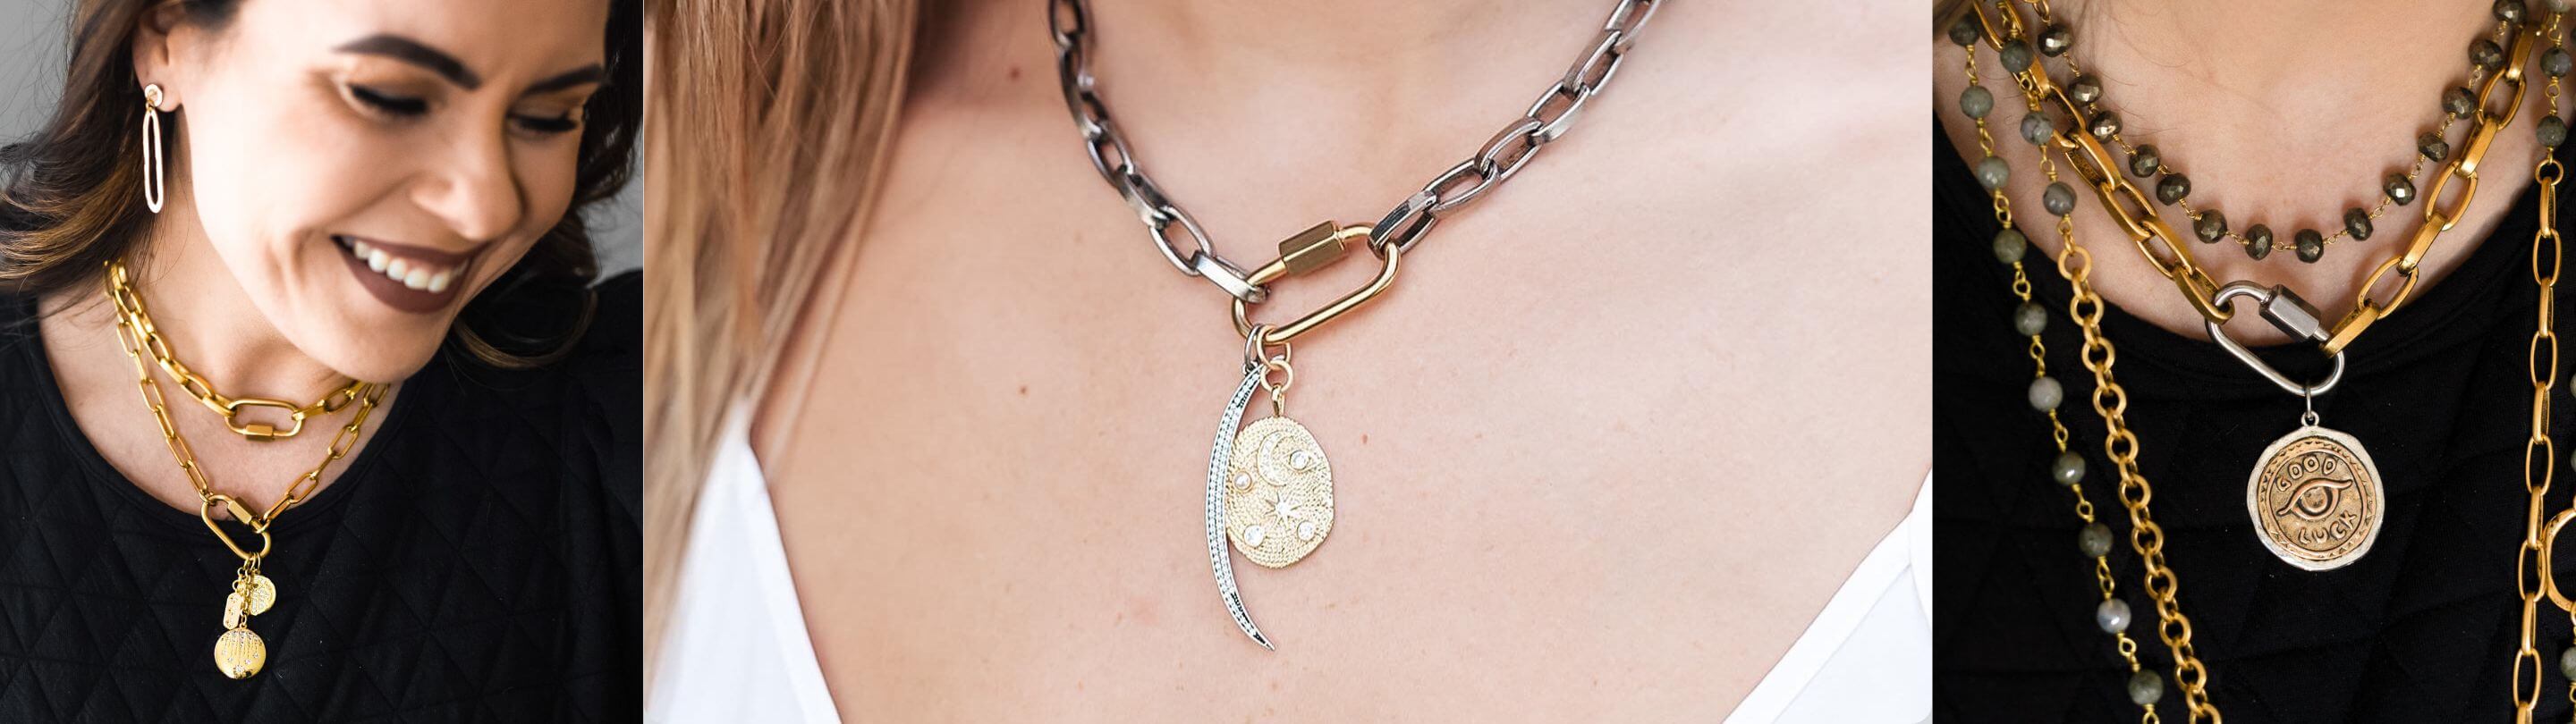 Oh Baby! Moms Are Loving These Personalized Necklaces